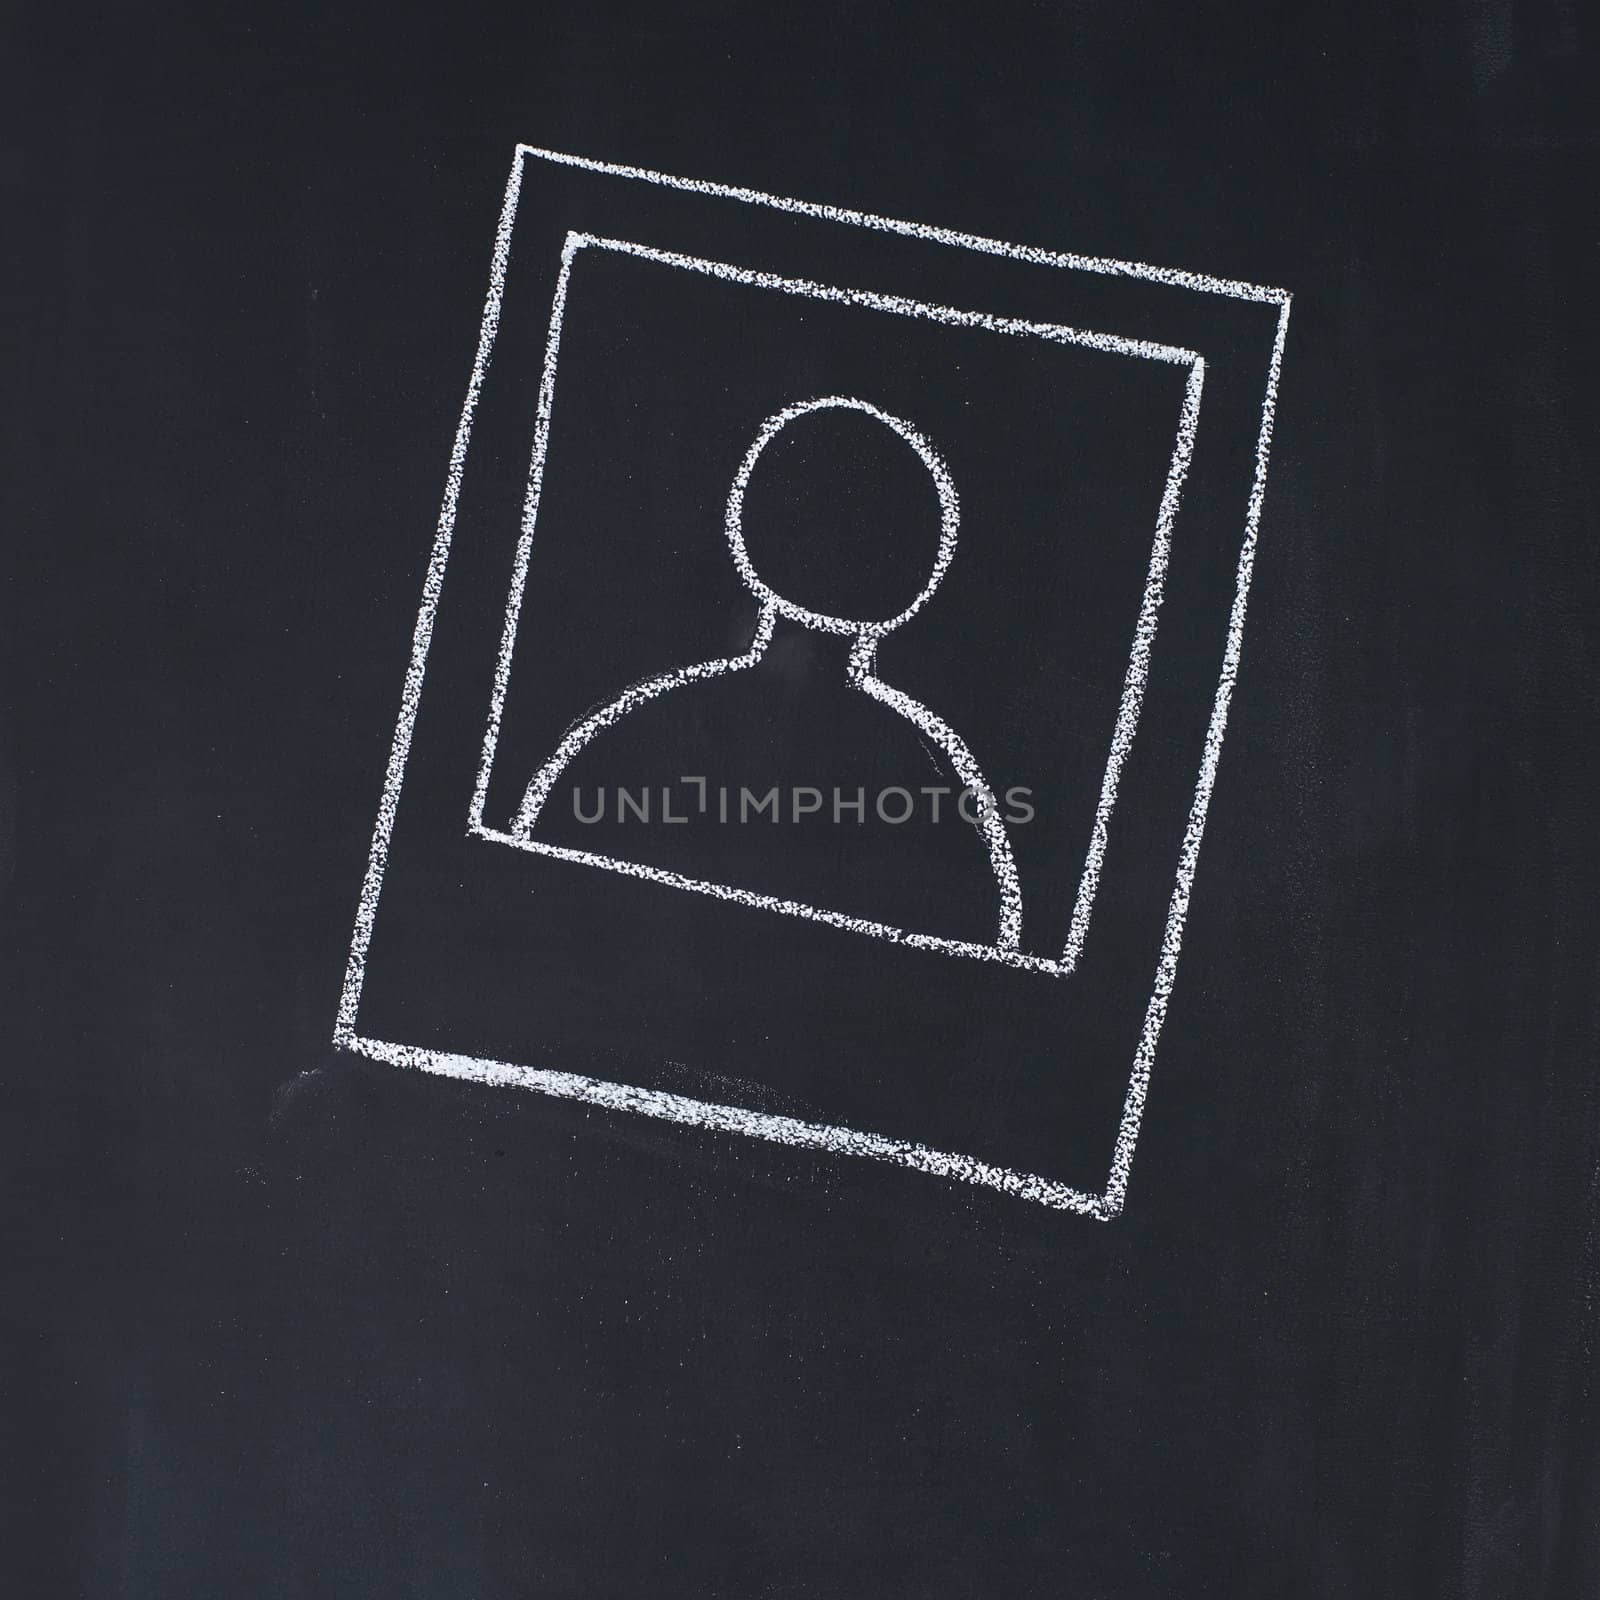 The template of the photo drawn on a blackboard